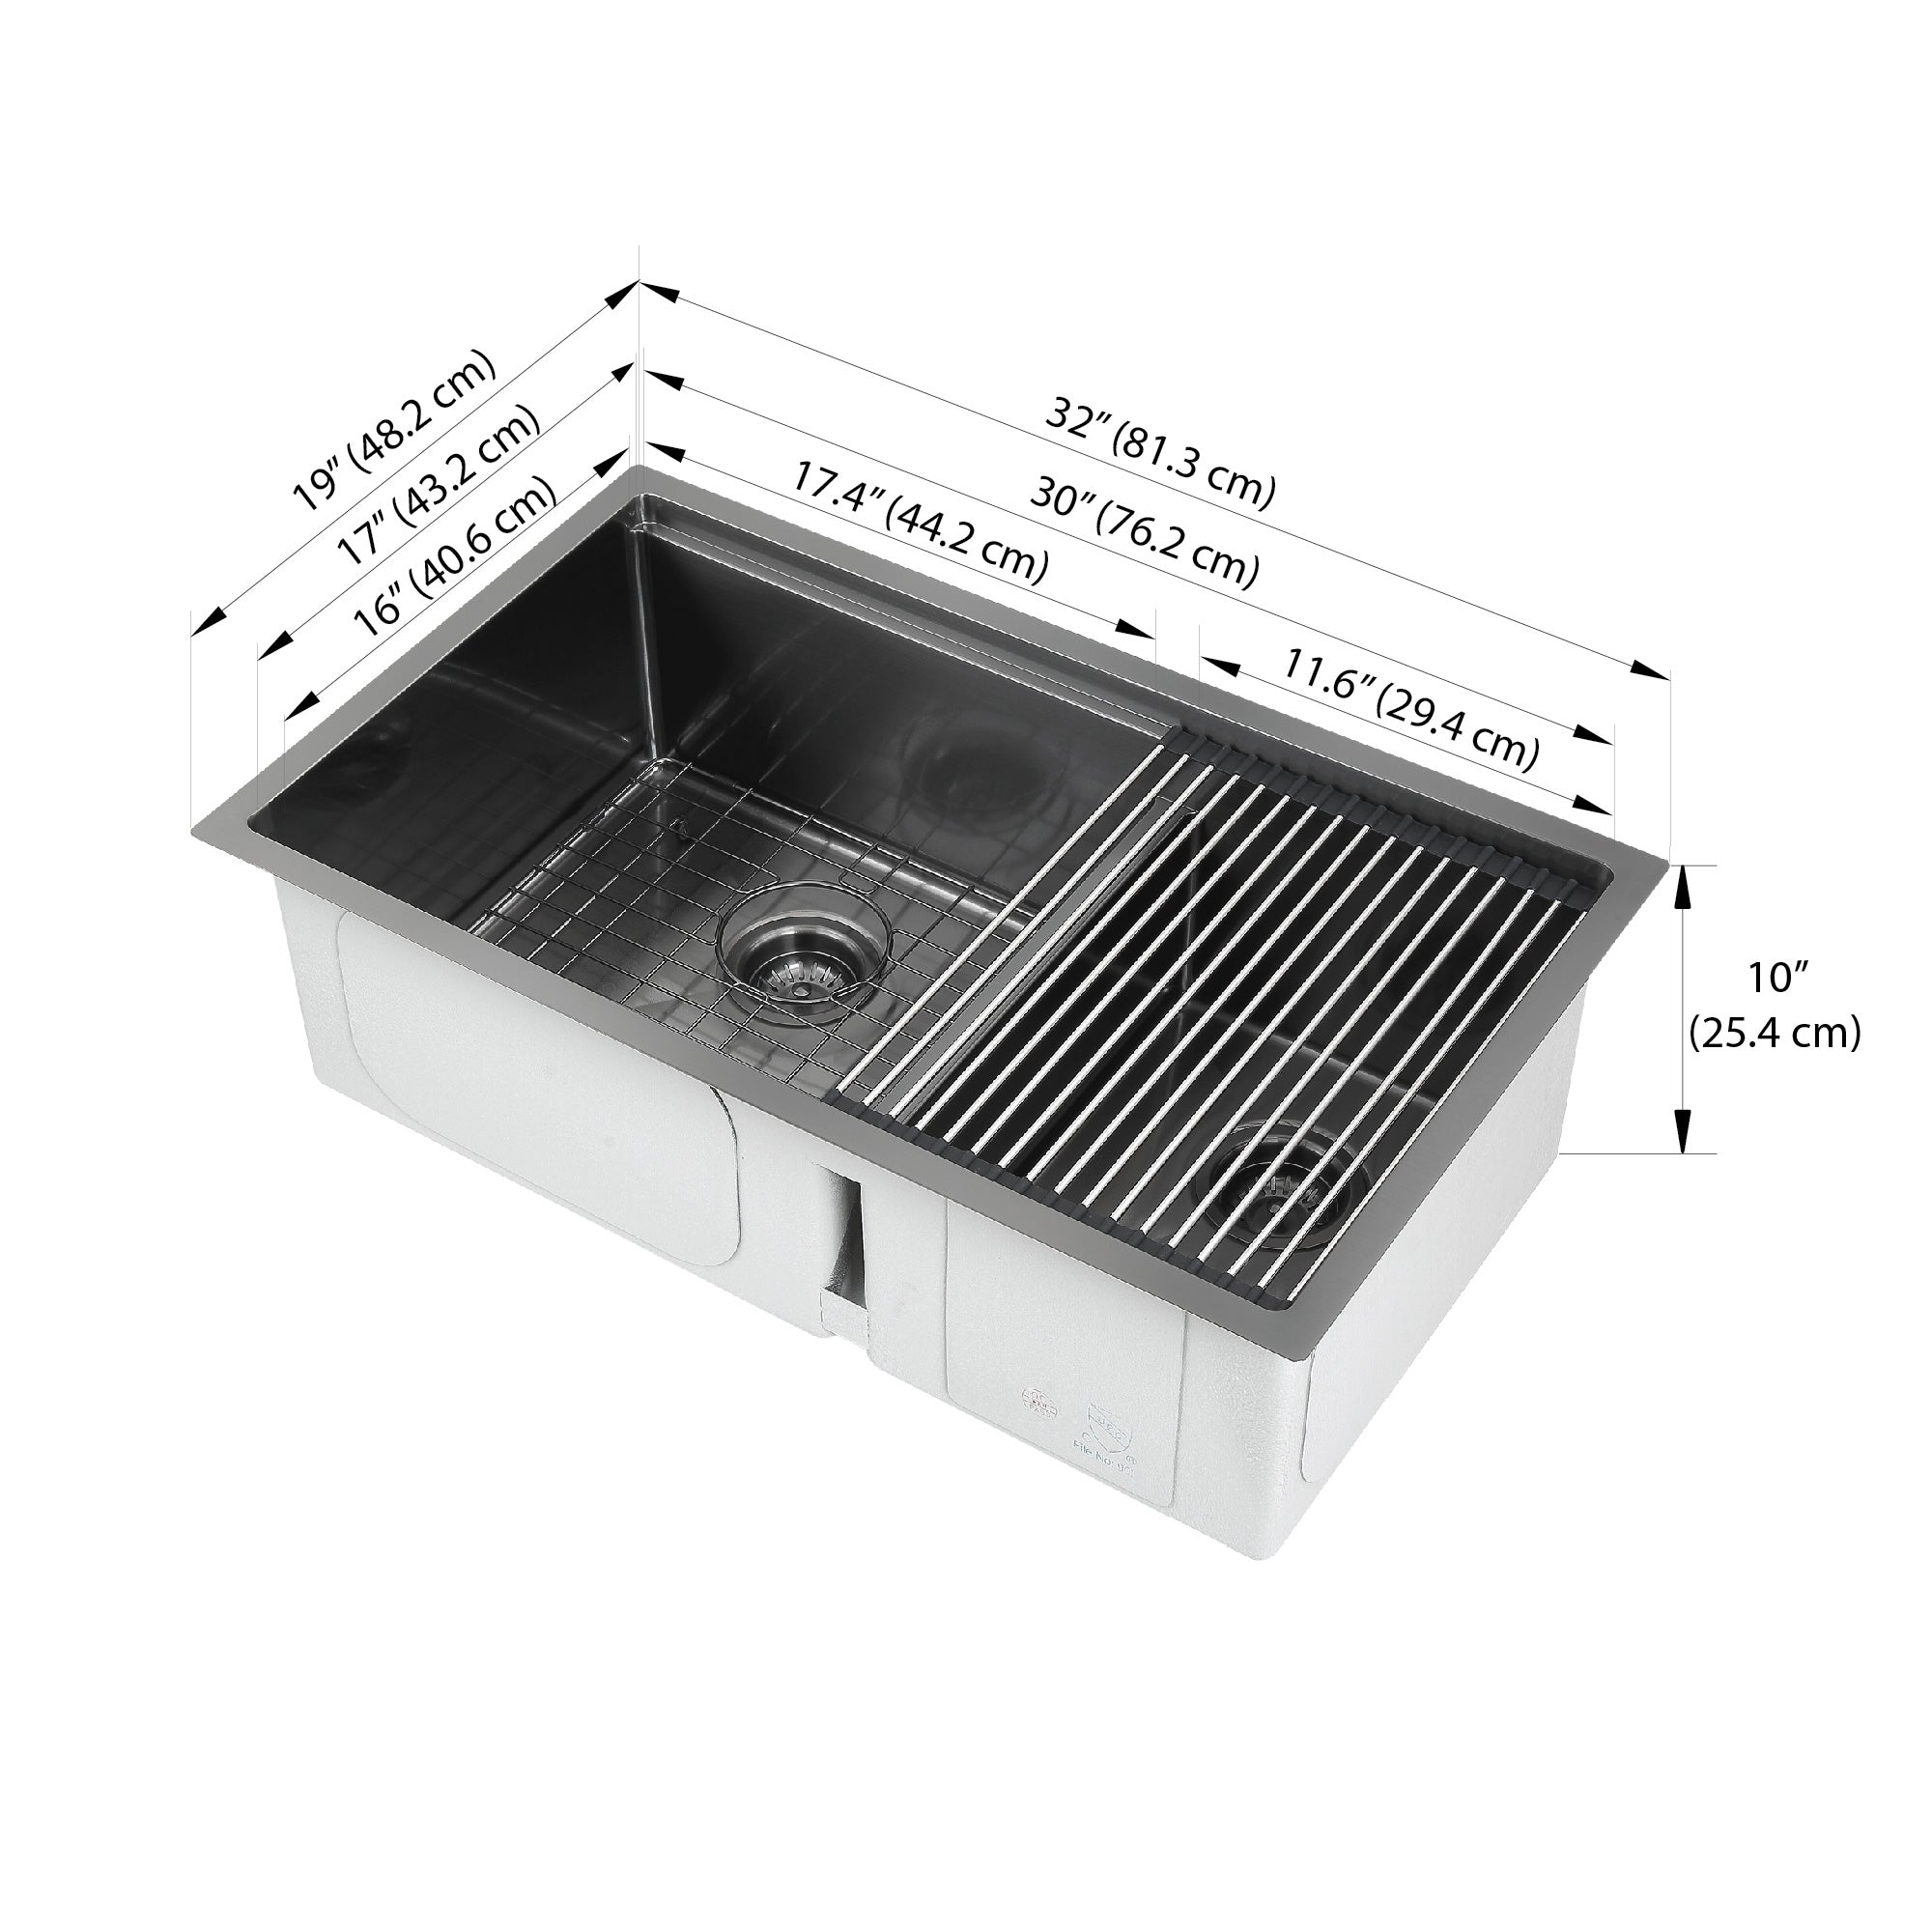 Ancona 32” 60/40 Double Bowl Undermount Kitchen Sink with Grid and Roll-Up Mat in Black PVD Nano